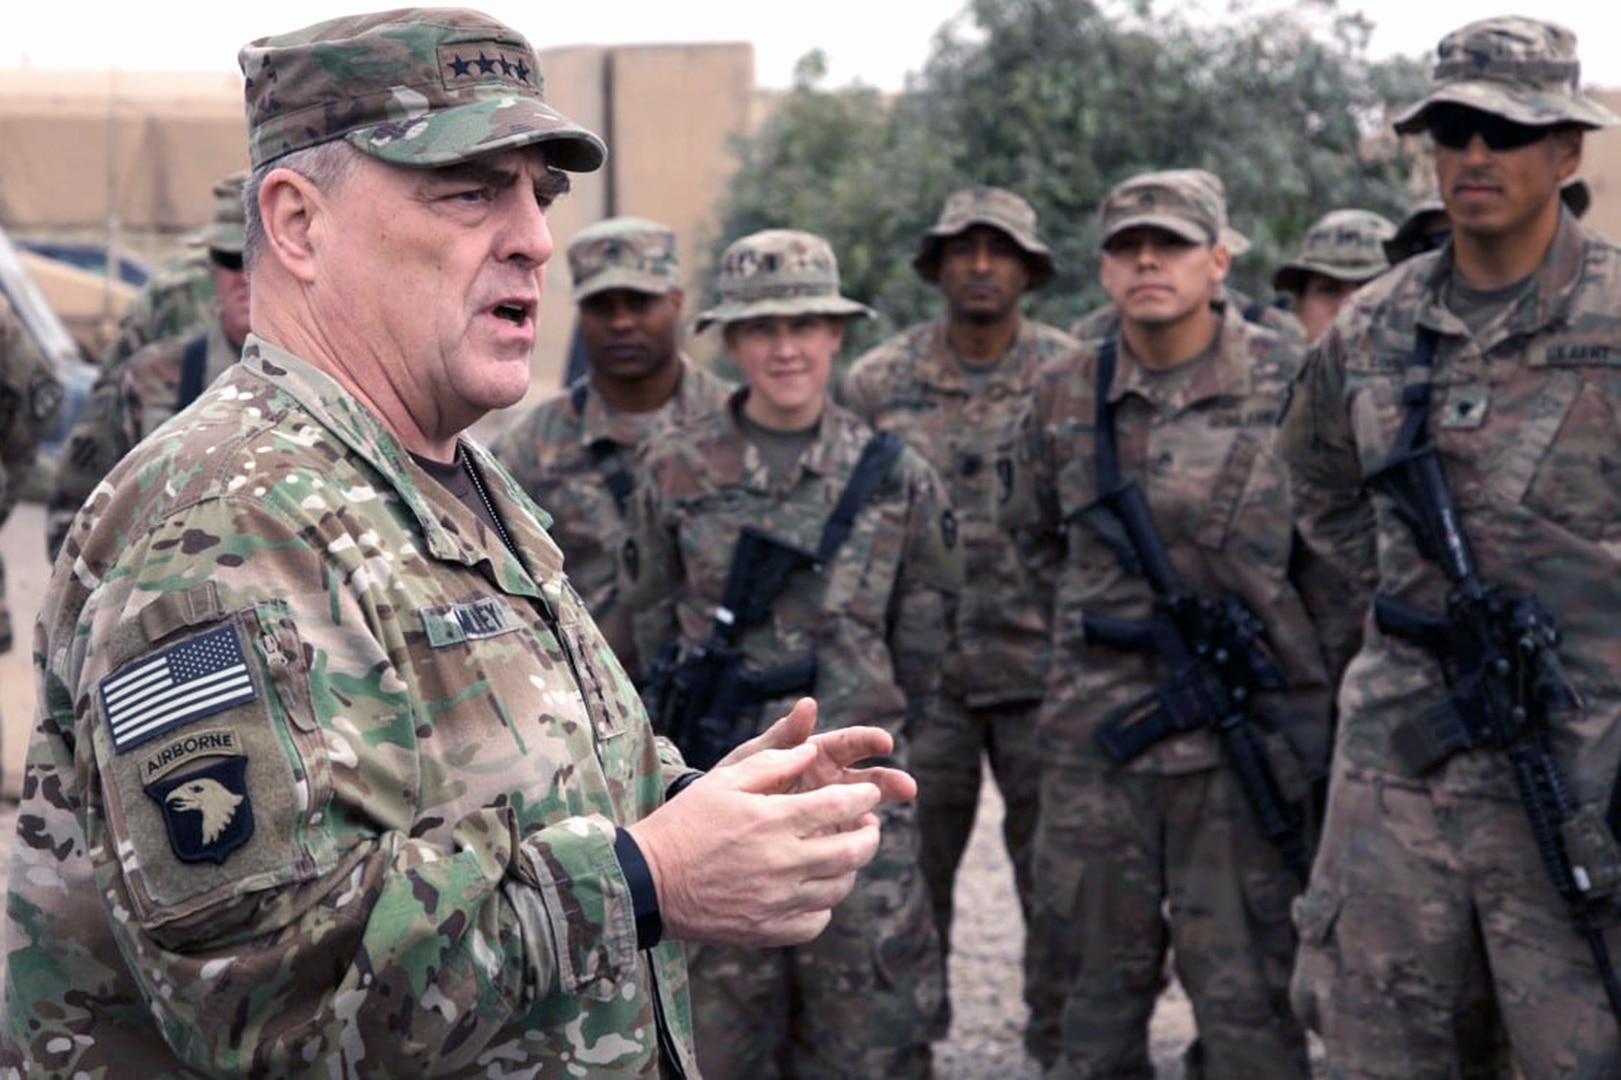 Chief of Staff of the Army Gen. Mark A. Milley speaks to Soldiers at Qayyarah Airfield West, Iraq, on Dec. 22, 2017. While there has been recent progress in readiness, Milley said that it still remains the Army's top priority.